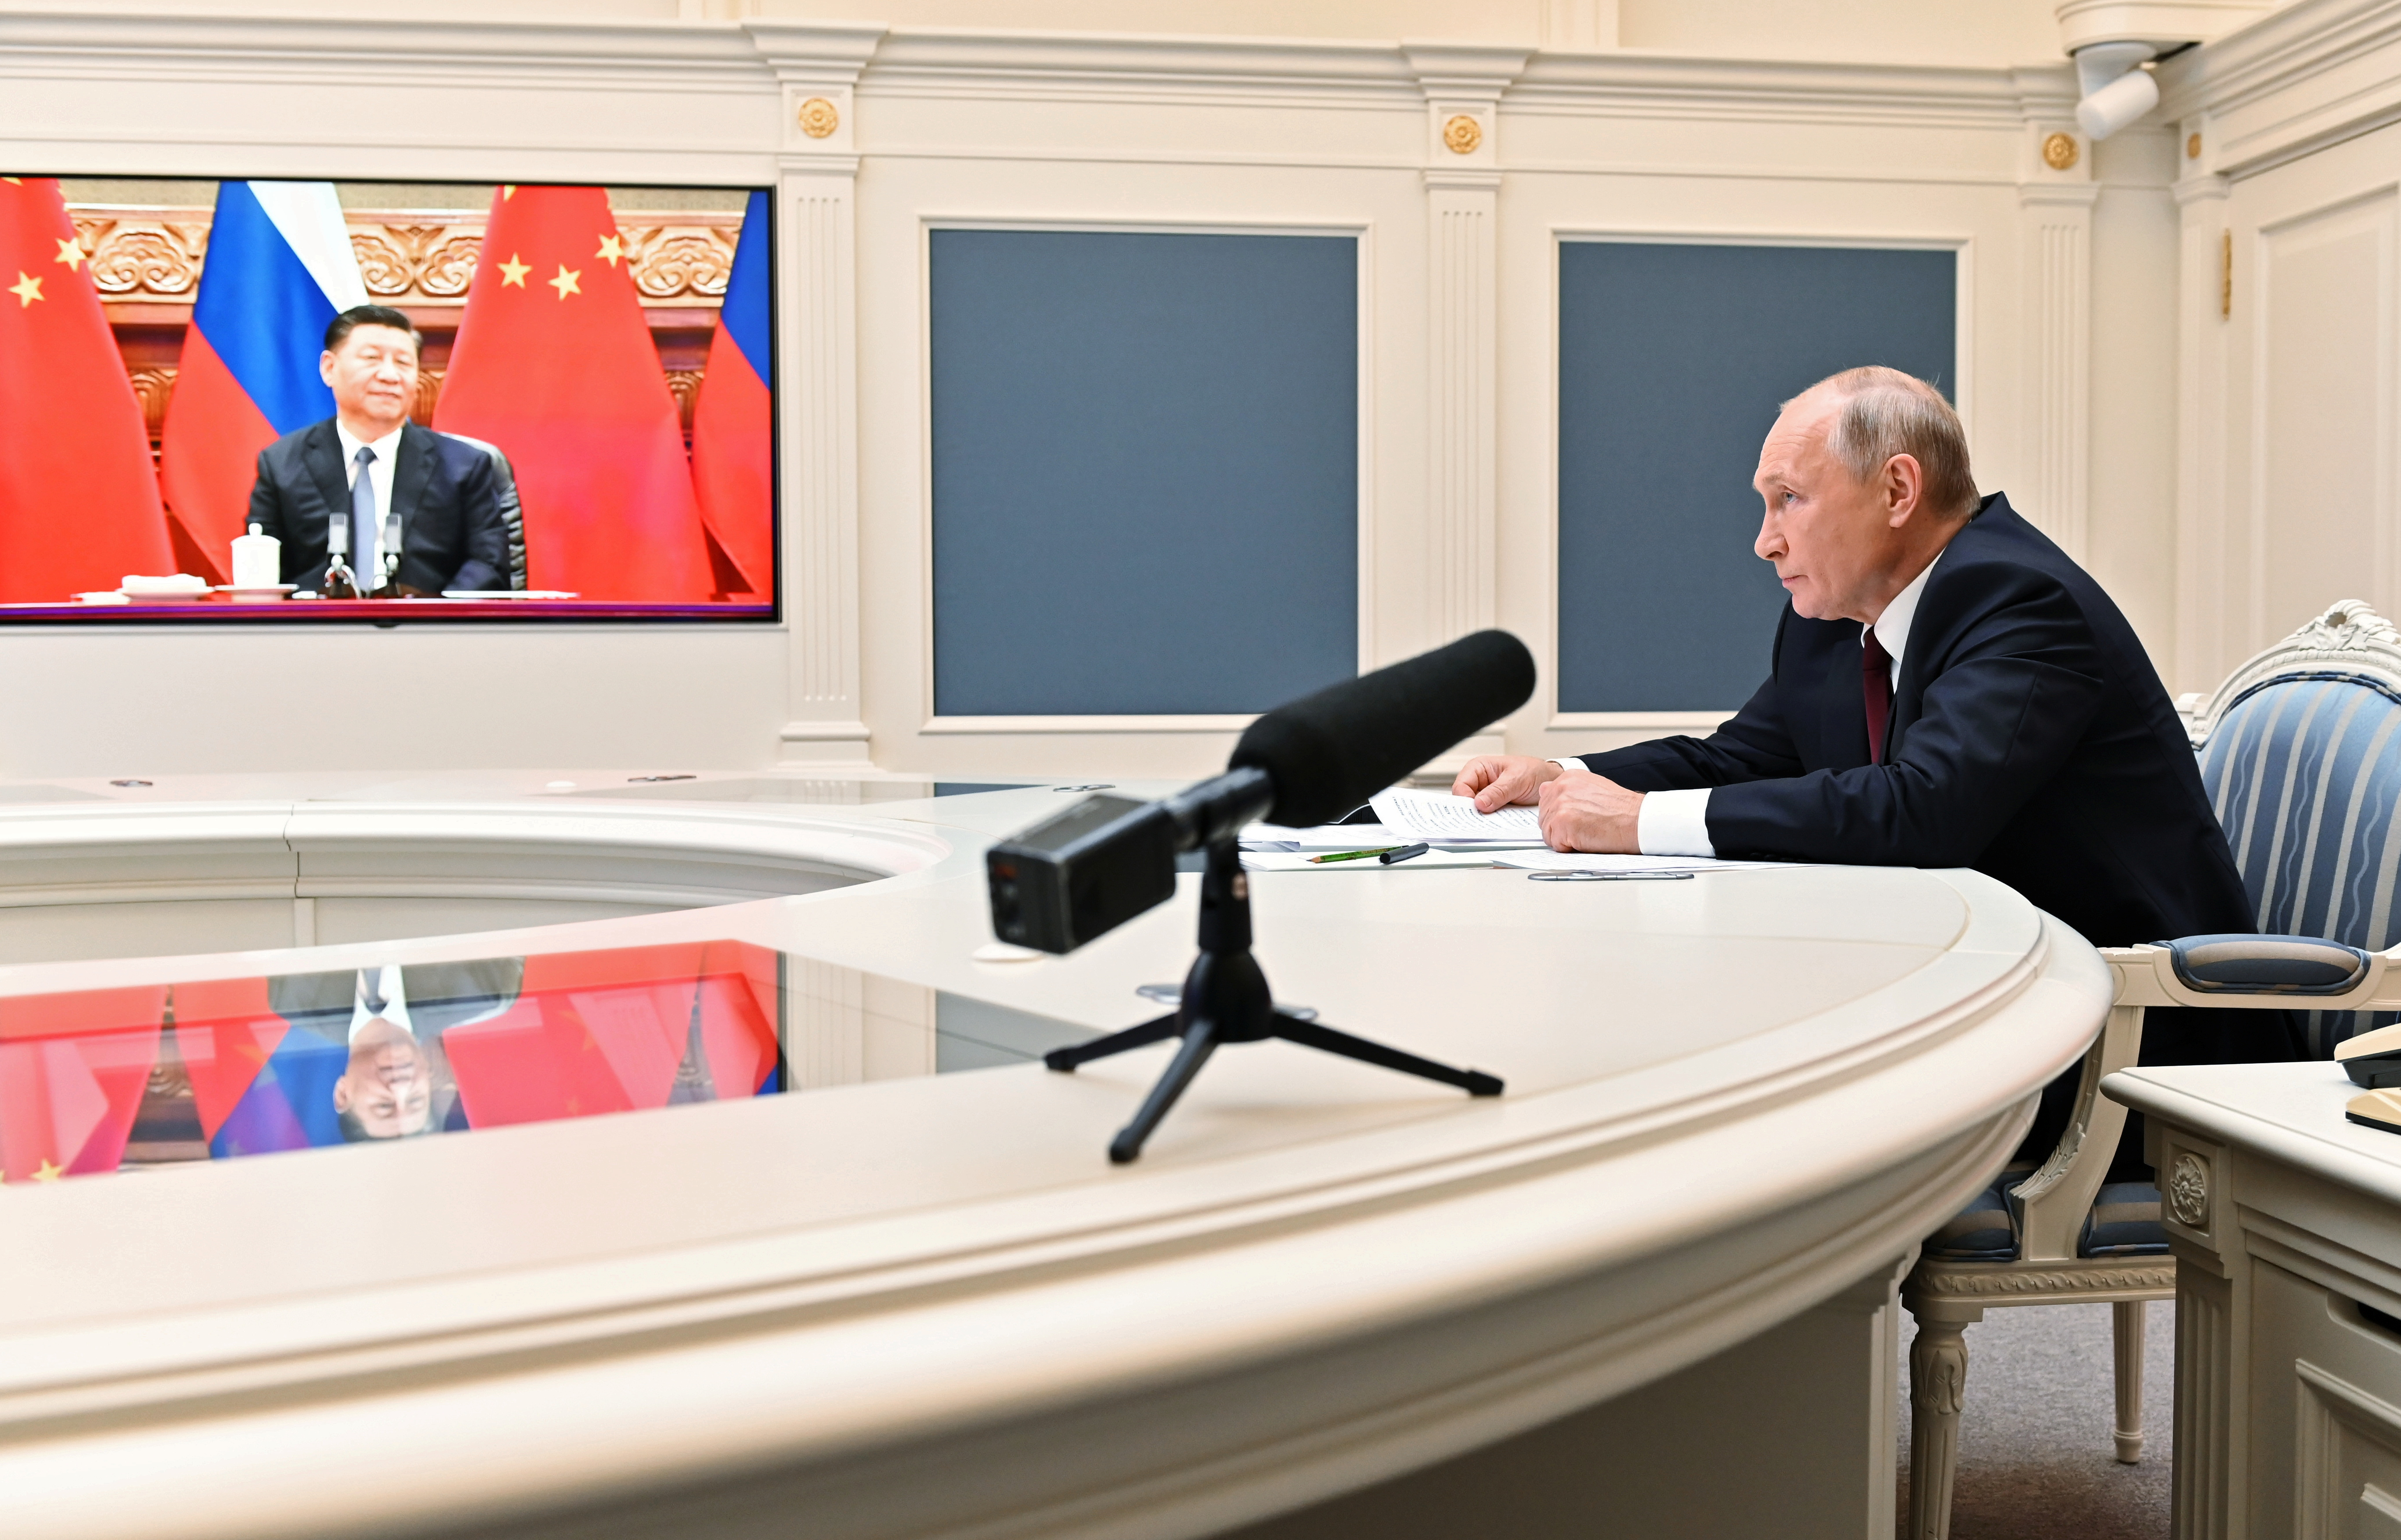 Russian President Vladimir Putin takes part in a video conference call with Chinese President Xi Jinping in Moscow